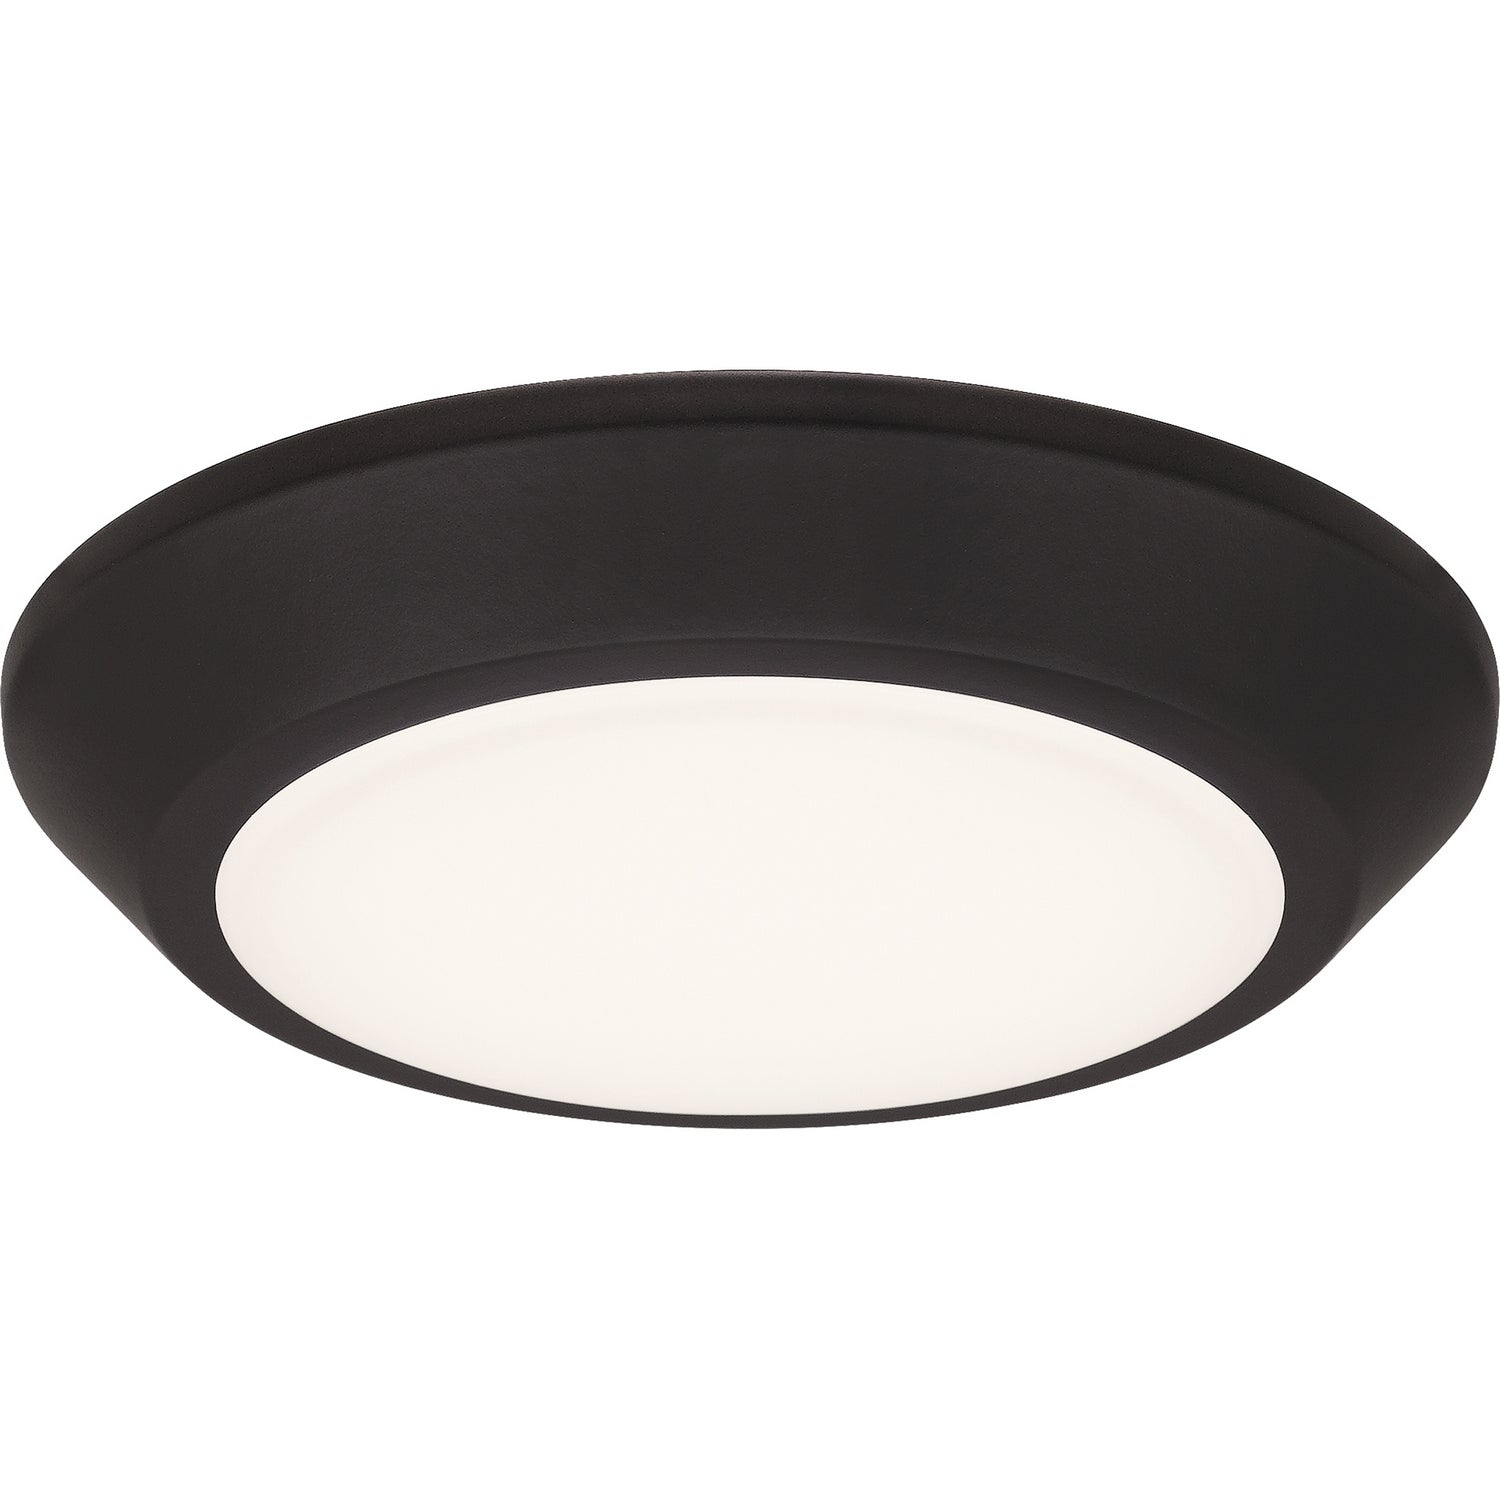 Verge LED Flush Mount by Quoizel in Oil Rubbed Bronze Finish (VRG1605OI)